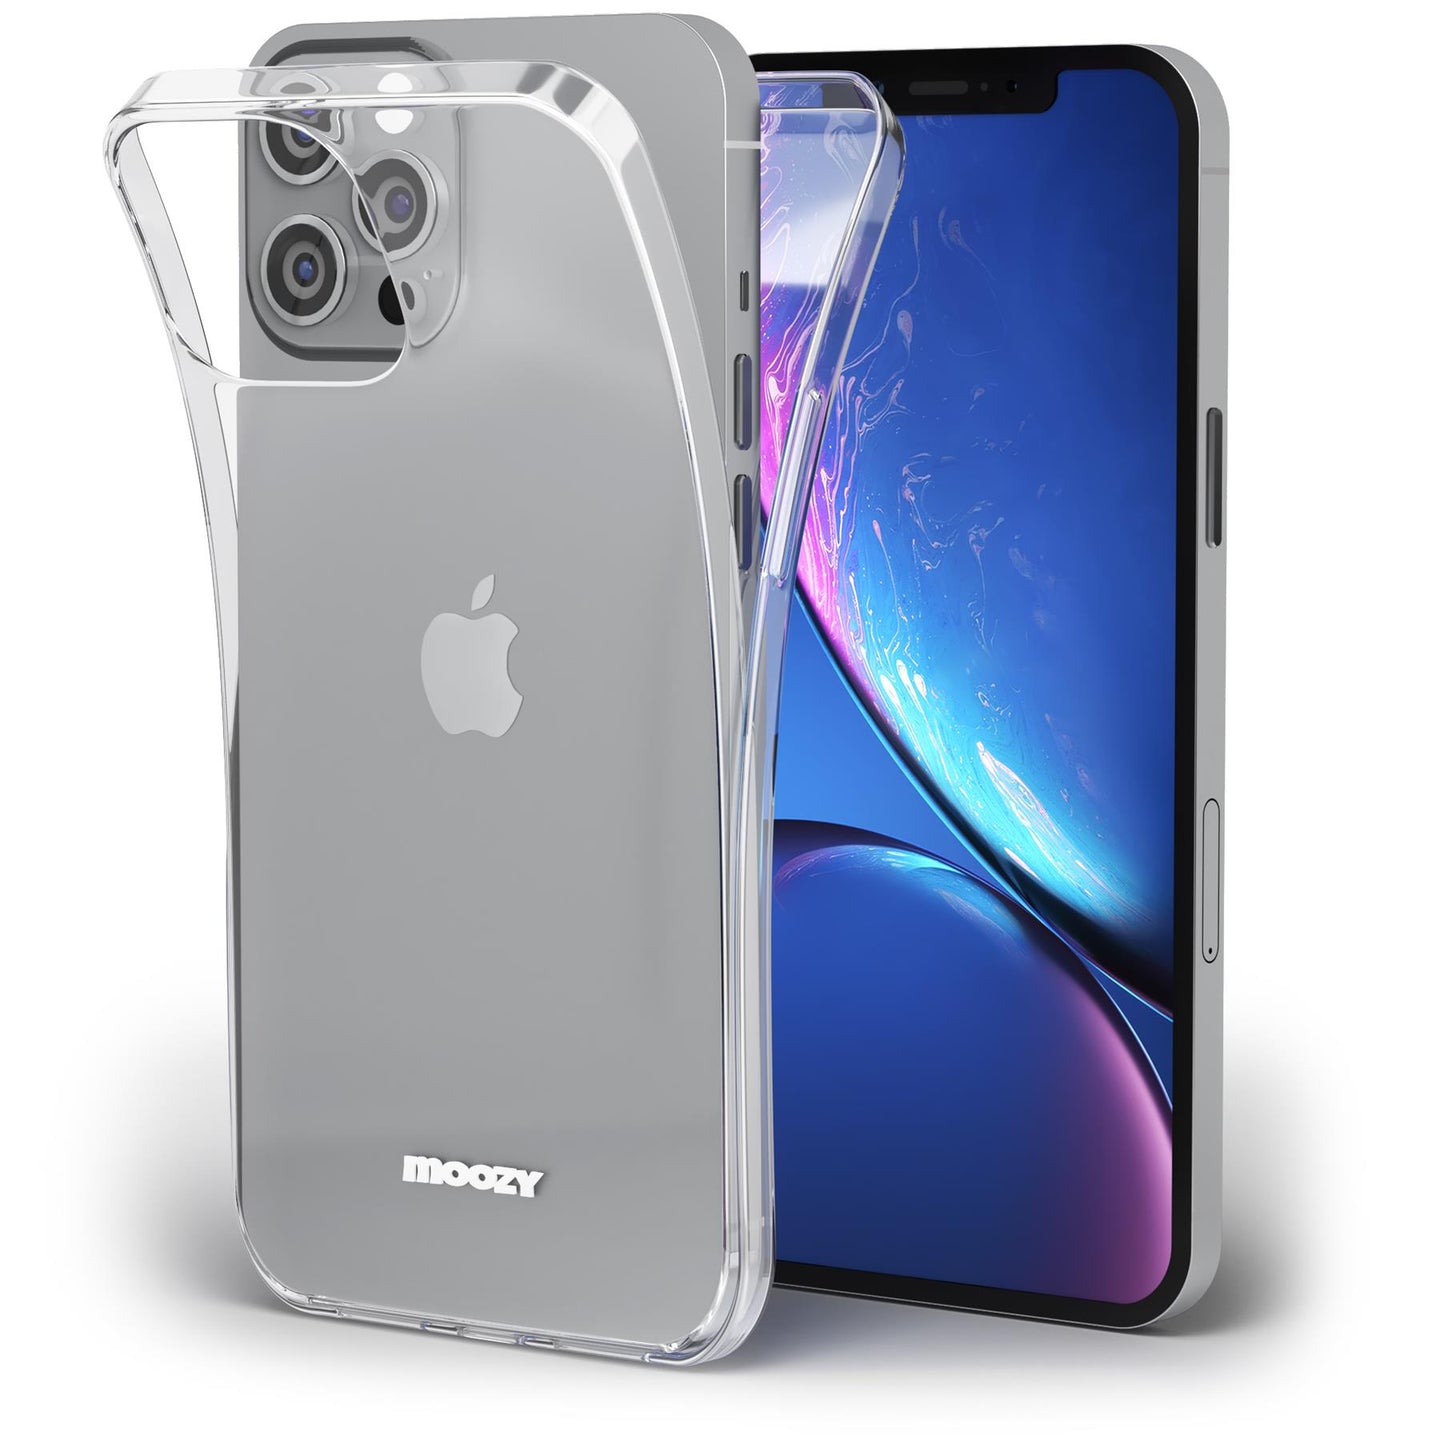 Moozy 360 Degree Case for iPhone 12 Pro Max - Full body Front and Back Slim Clear Transparent TPU Silicone Gel Cover